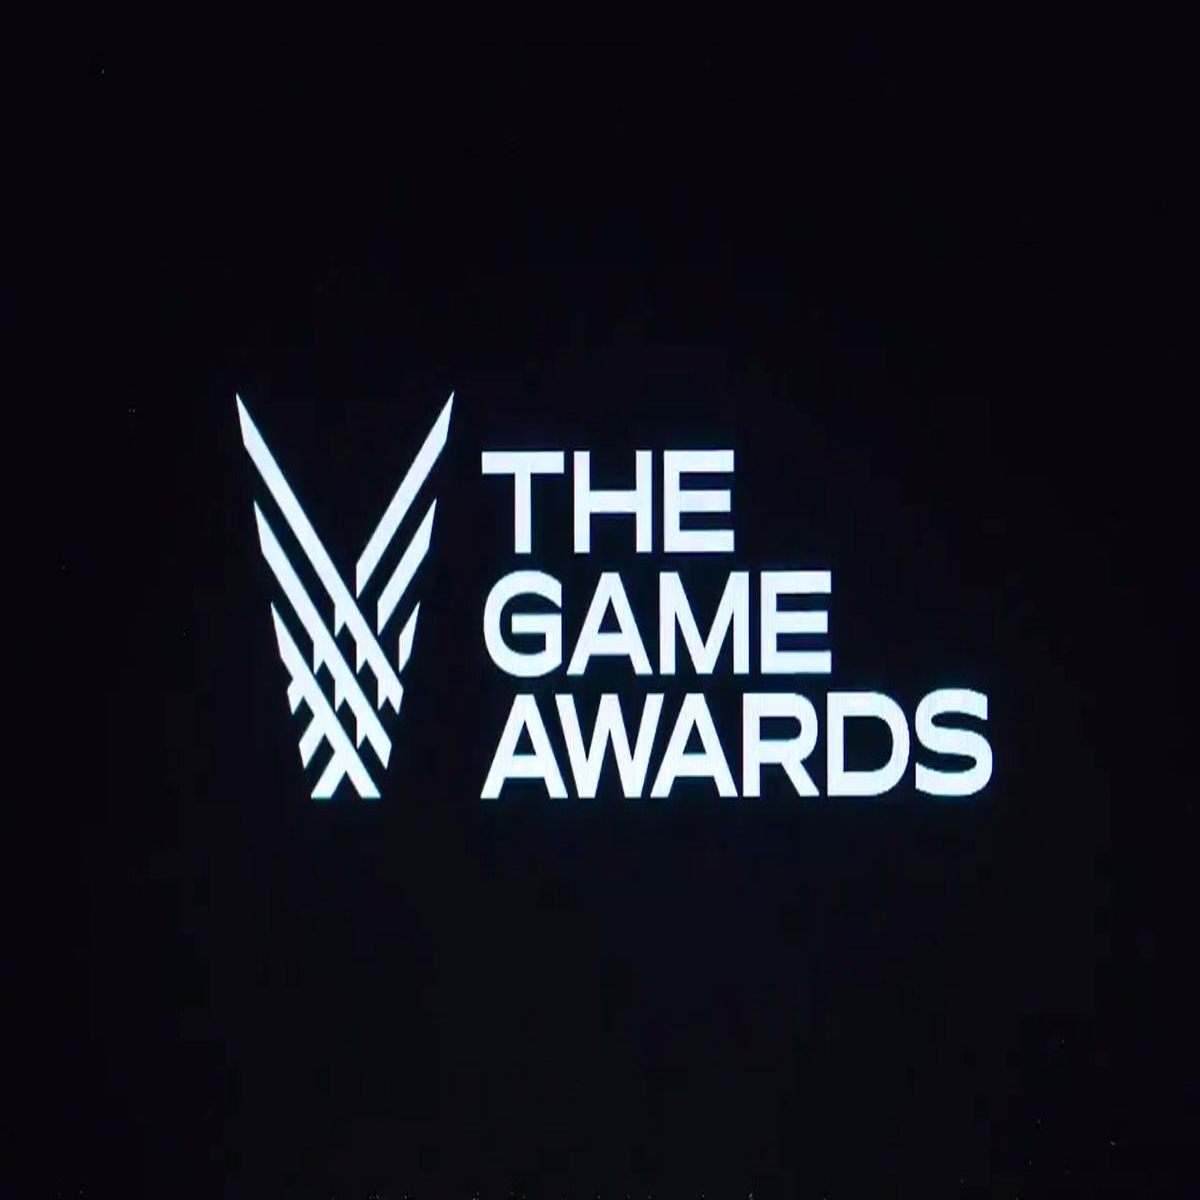 Red Dead Redemption 2, God of War Lead The Game Awards 2018 Nominations